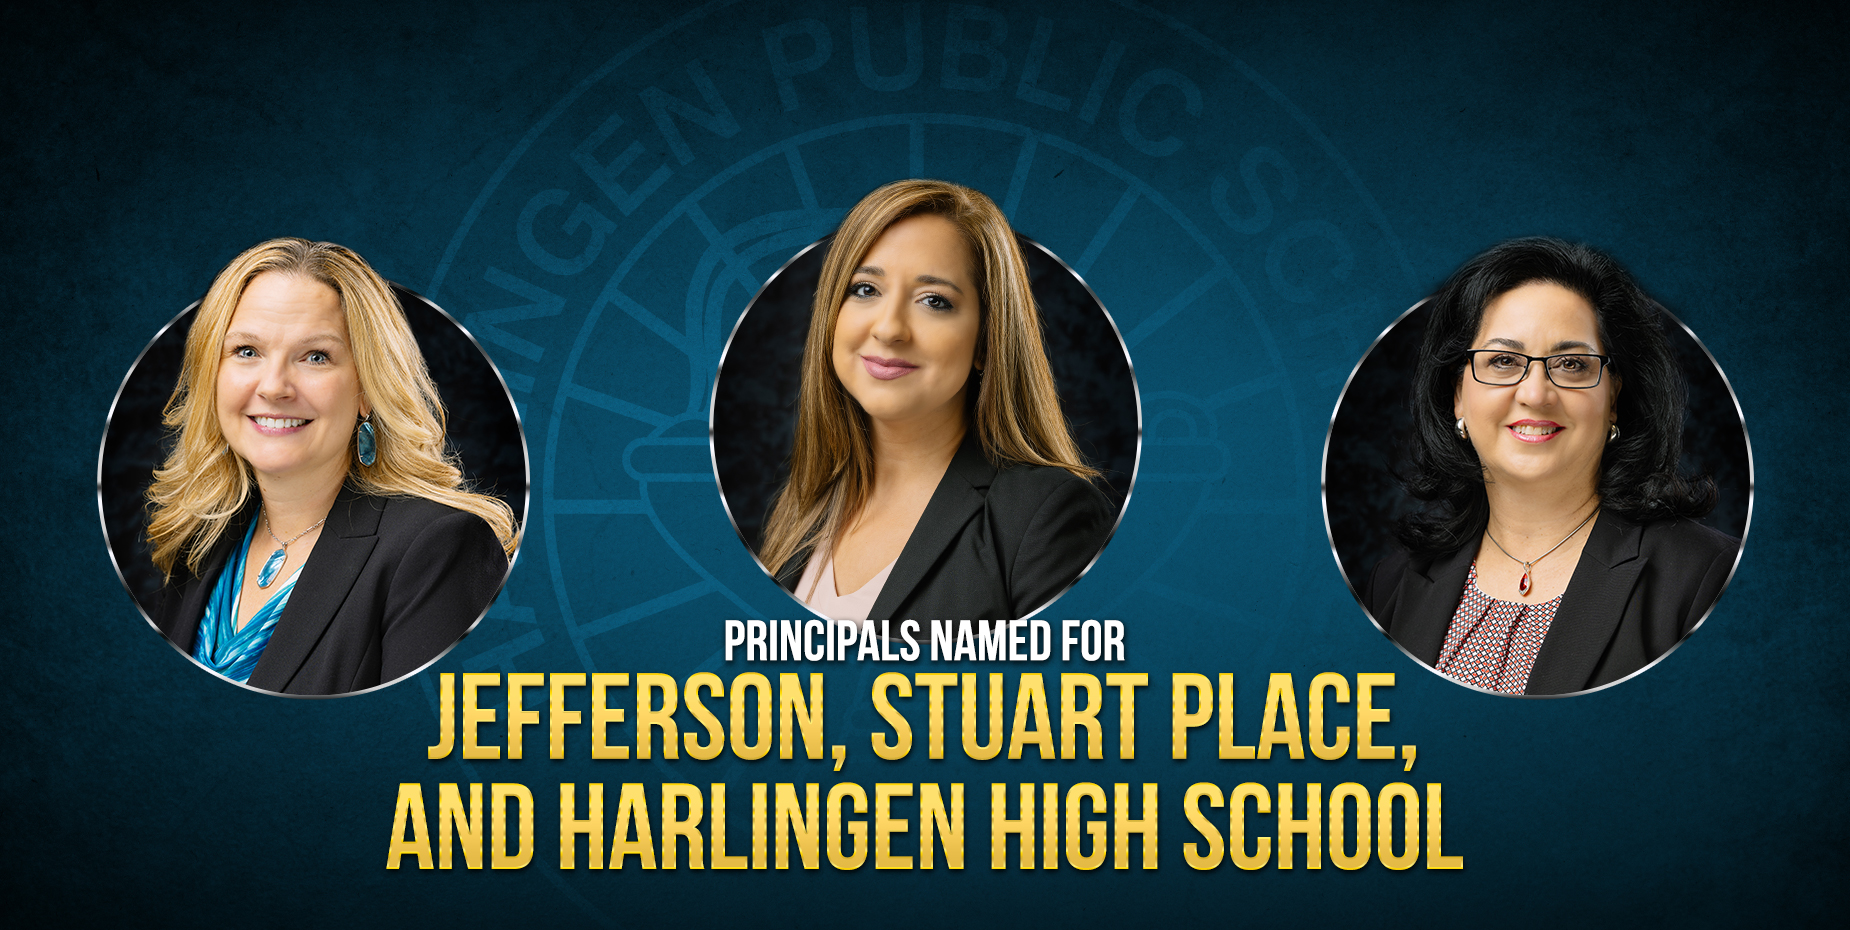 Principals named for Jefferson, Stuart Place, and Harlingen High School